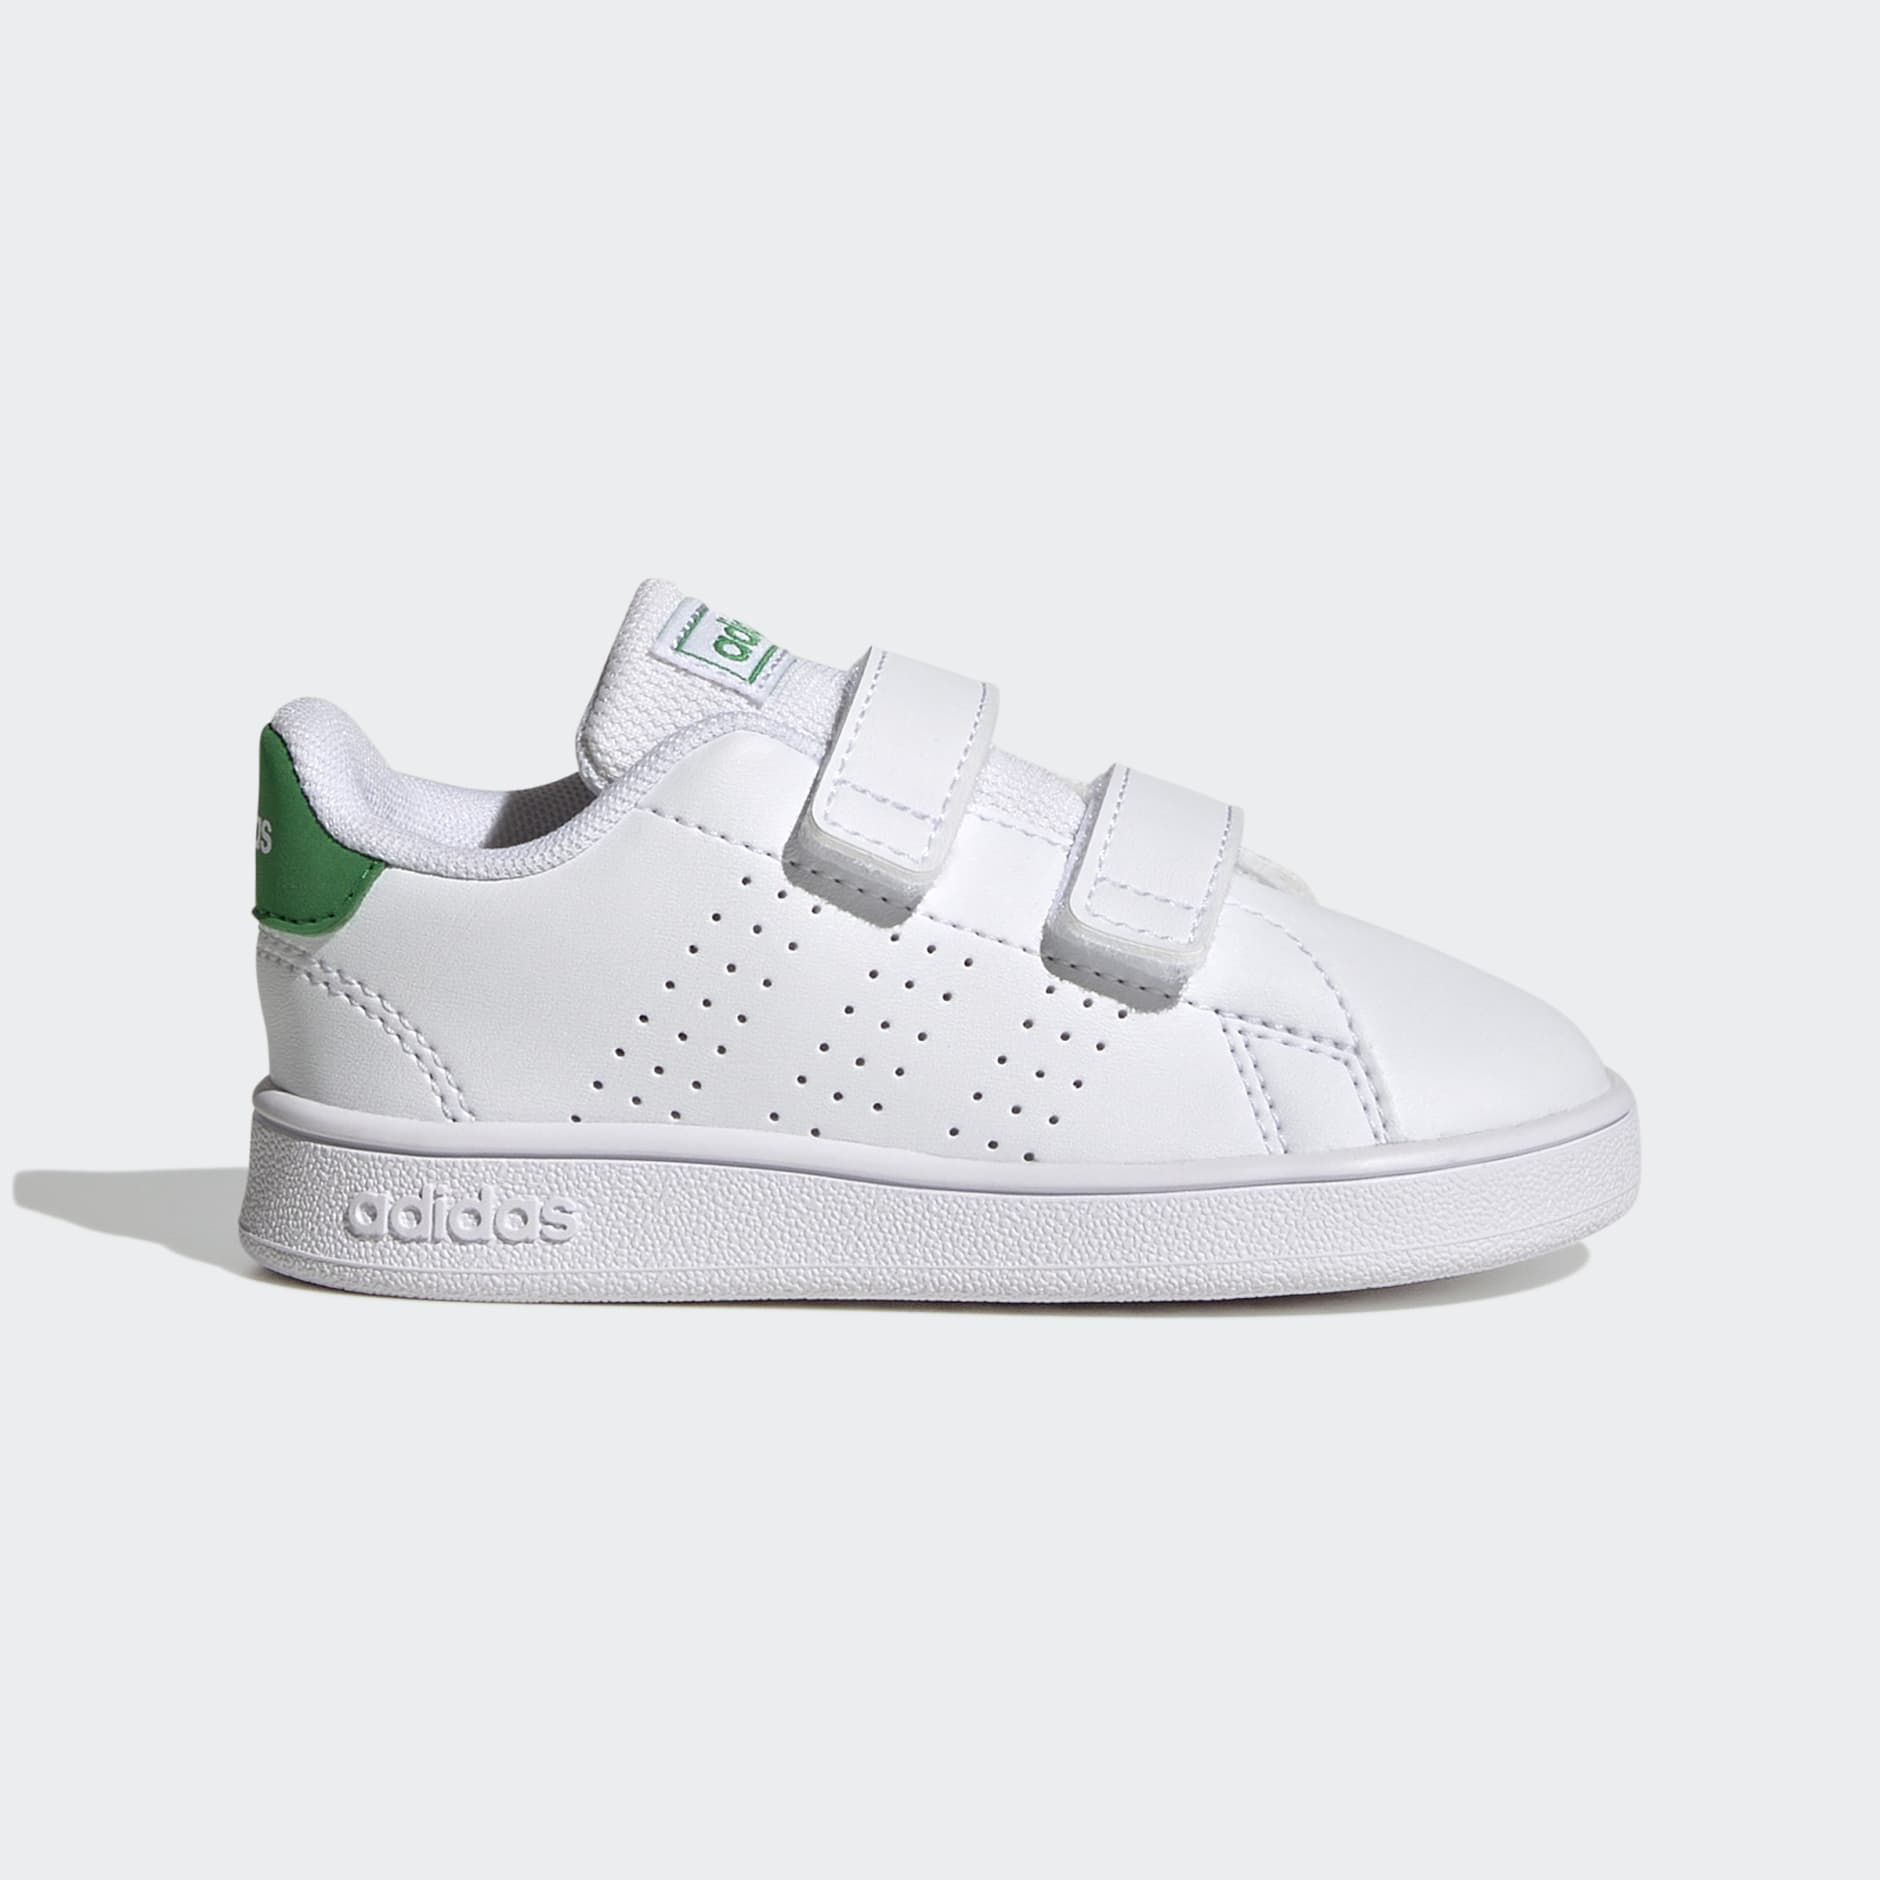 Shoes LK | adidas Two Hook-and-Loop White Lifestyle - Court adidas Advantage